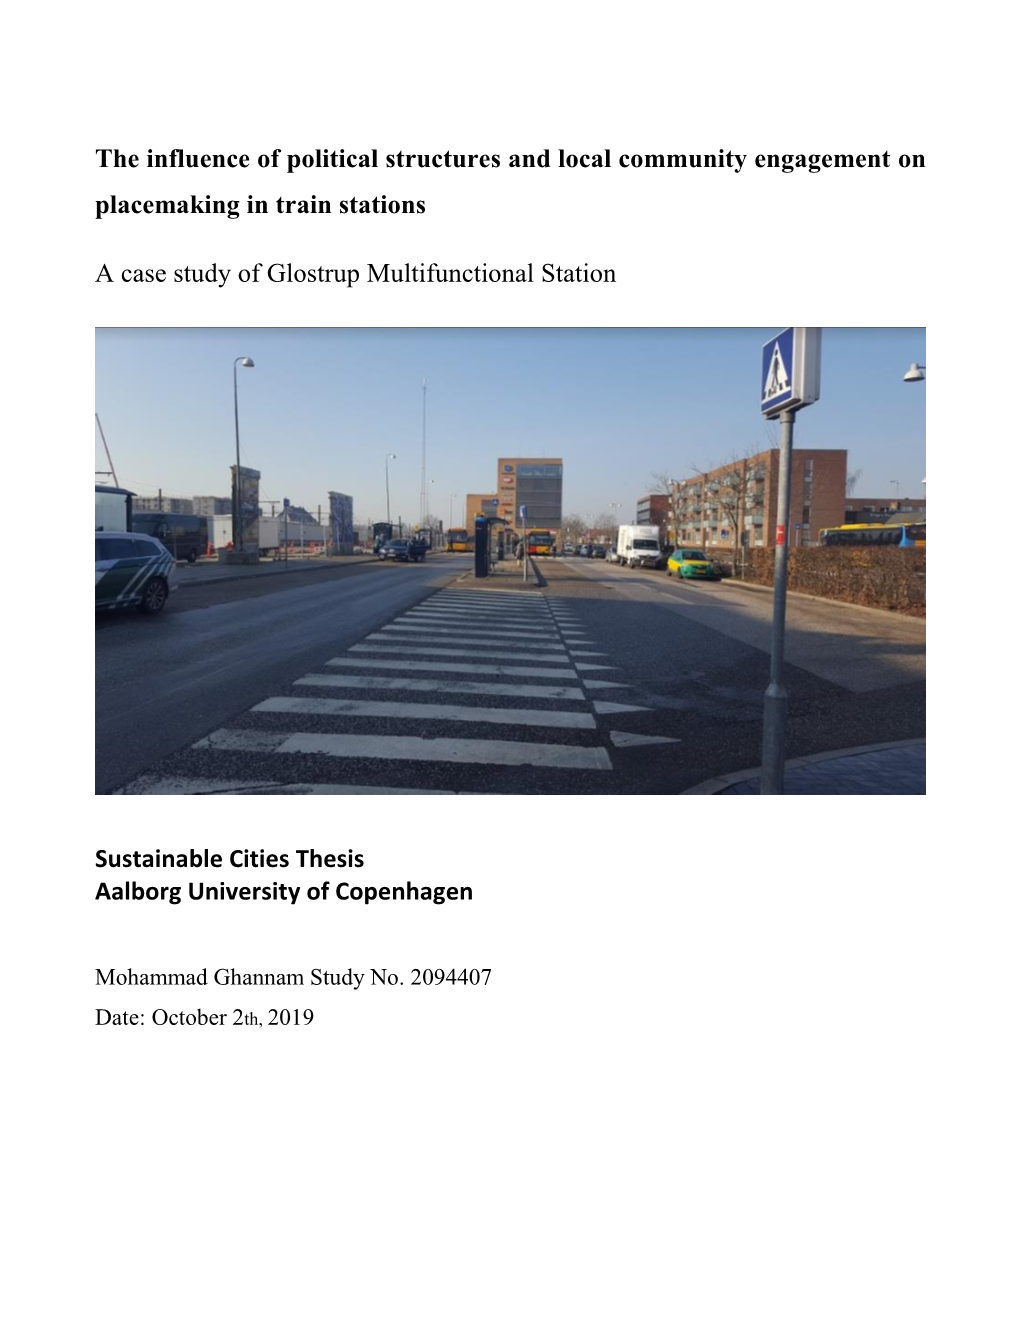 The Influence of Political Structures and Local Community Engagement on Placemaking in Train Stations a Case Study of Glostrup M